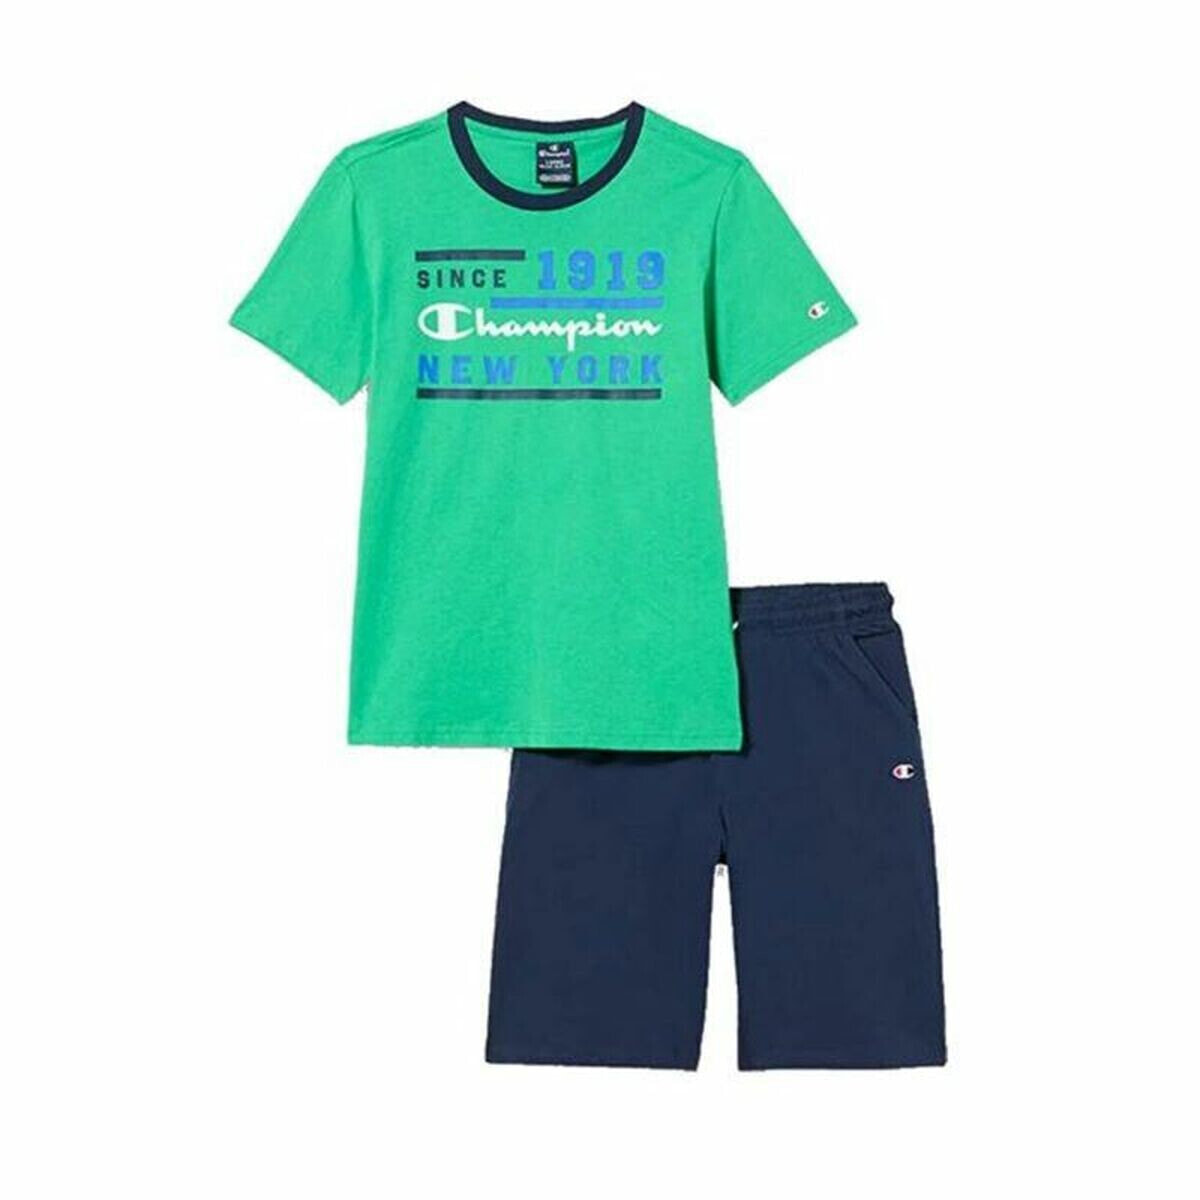 Children's Sports Outfit Champion Green 2 Pieces Lime green